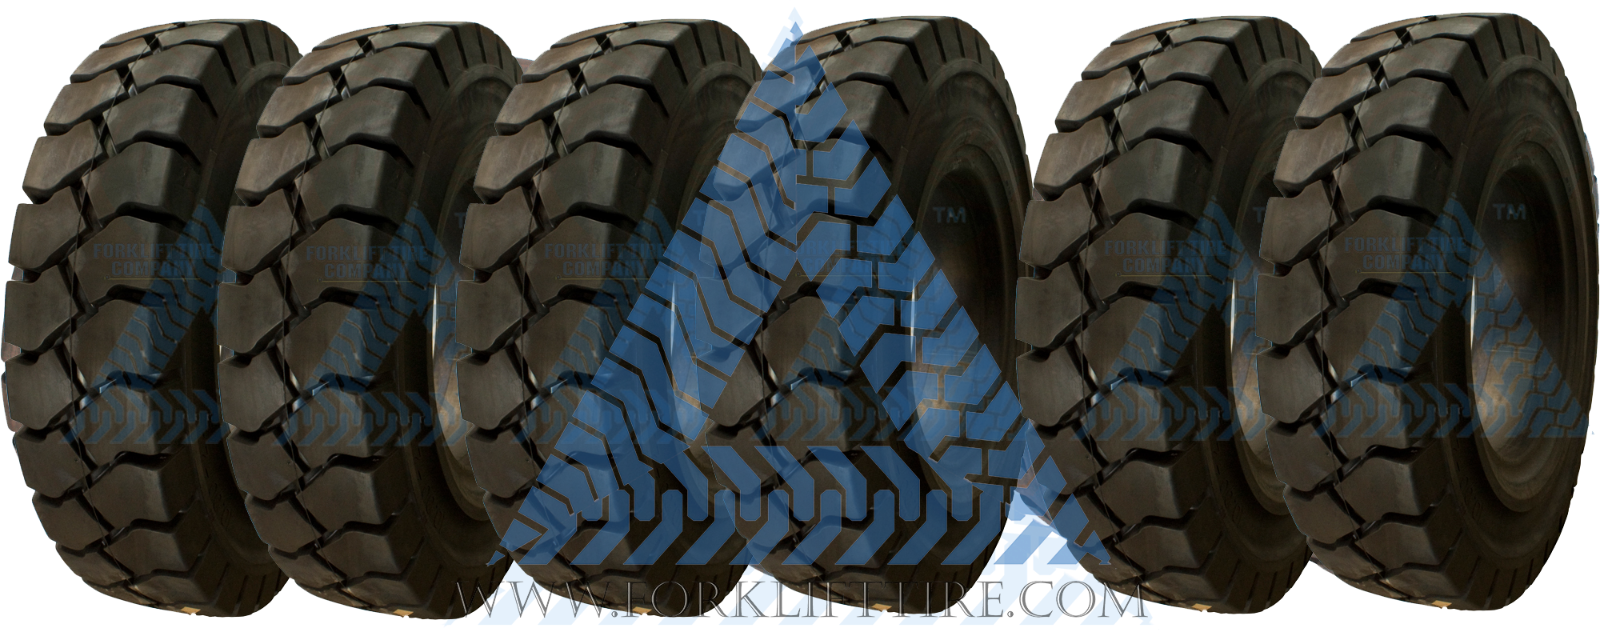 6PK 1200X20 TIRES-(8.0)RW SOLID TIRES 1200-20 TIRES  FORKLIFT TIRES SOLID